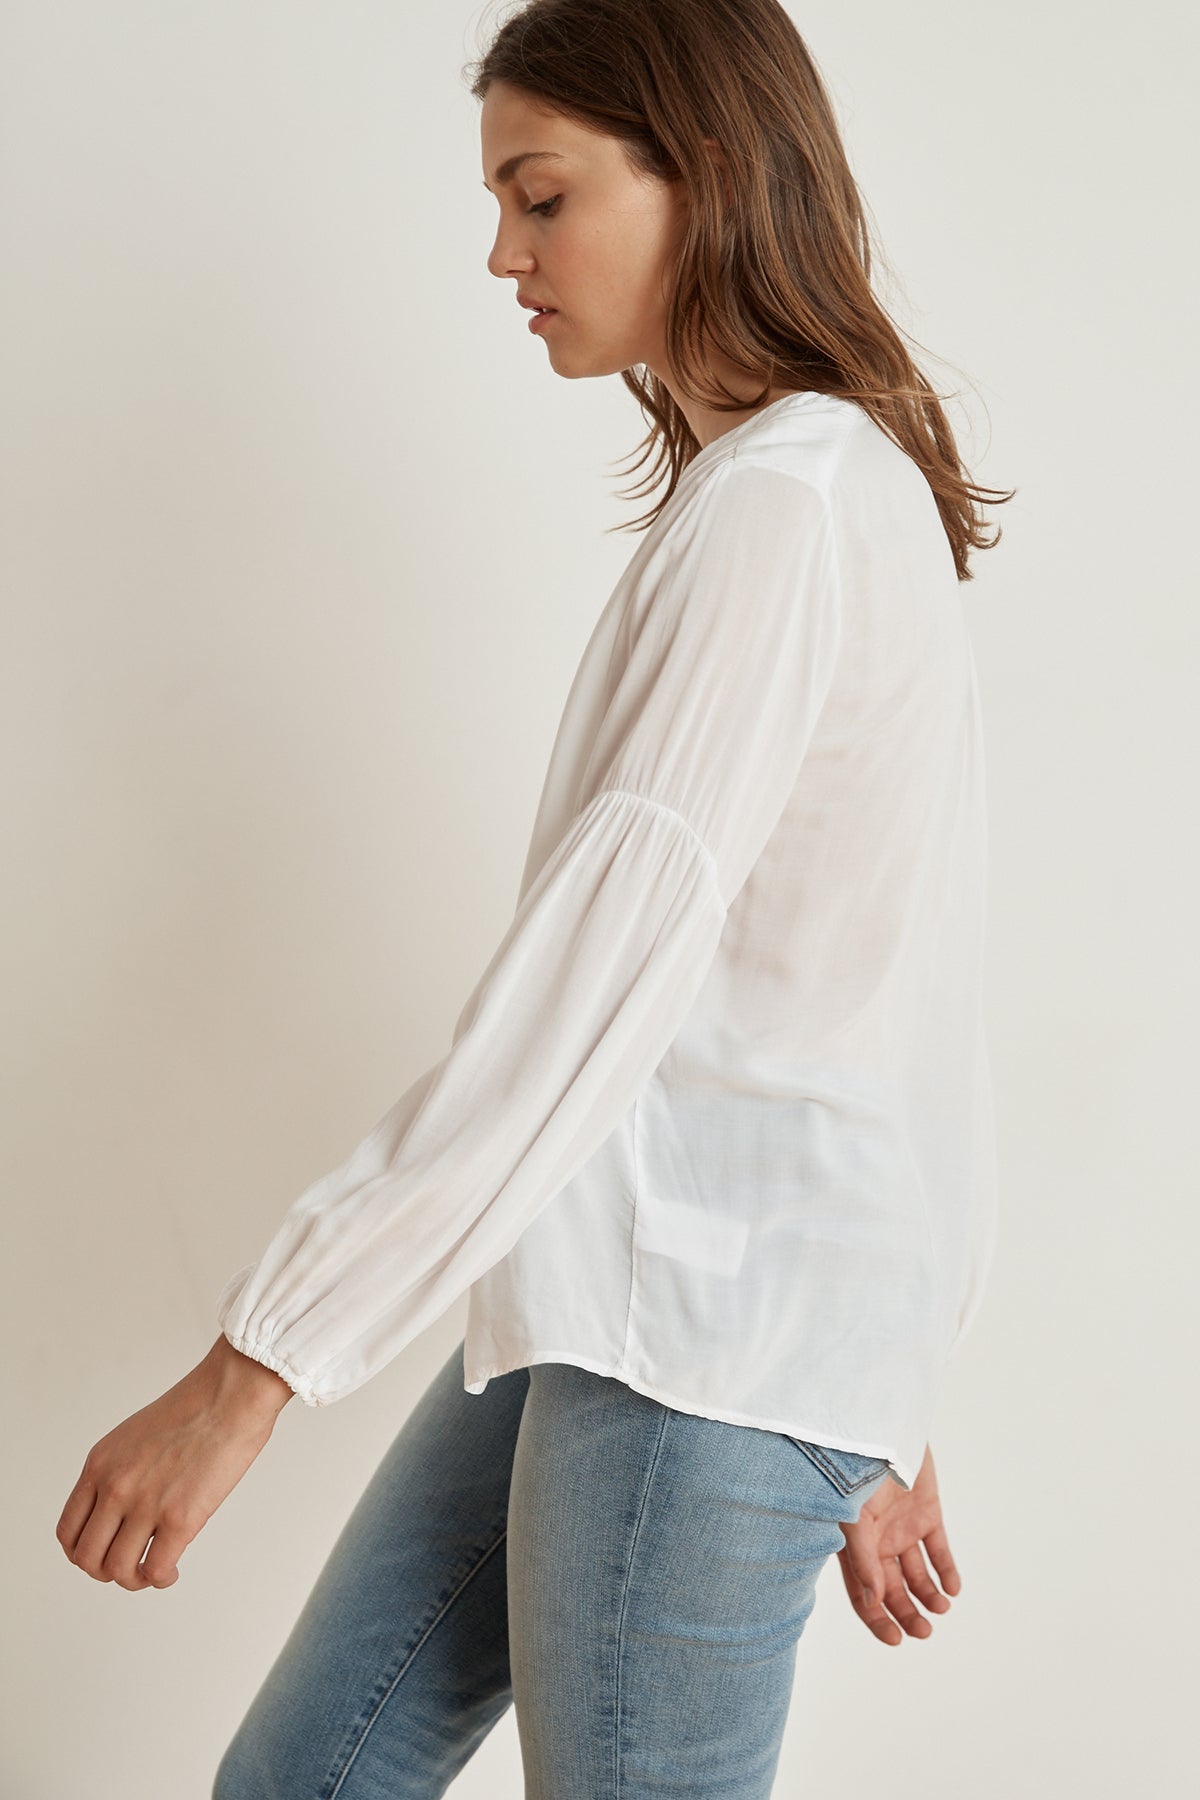   The model is wearing a YULIA RAYON CHALLIS PEASANT SLEEVE BLOUSE by Velvet by Graham & Spencer, which adds a breath of fresh air to her outfit. 